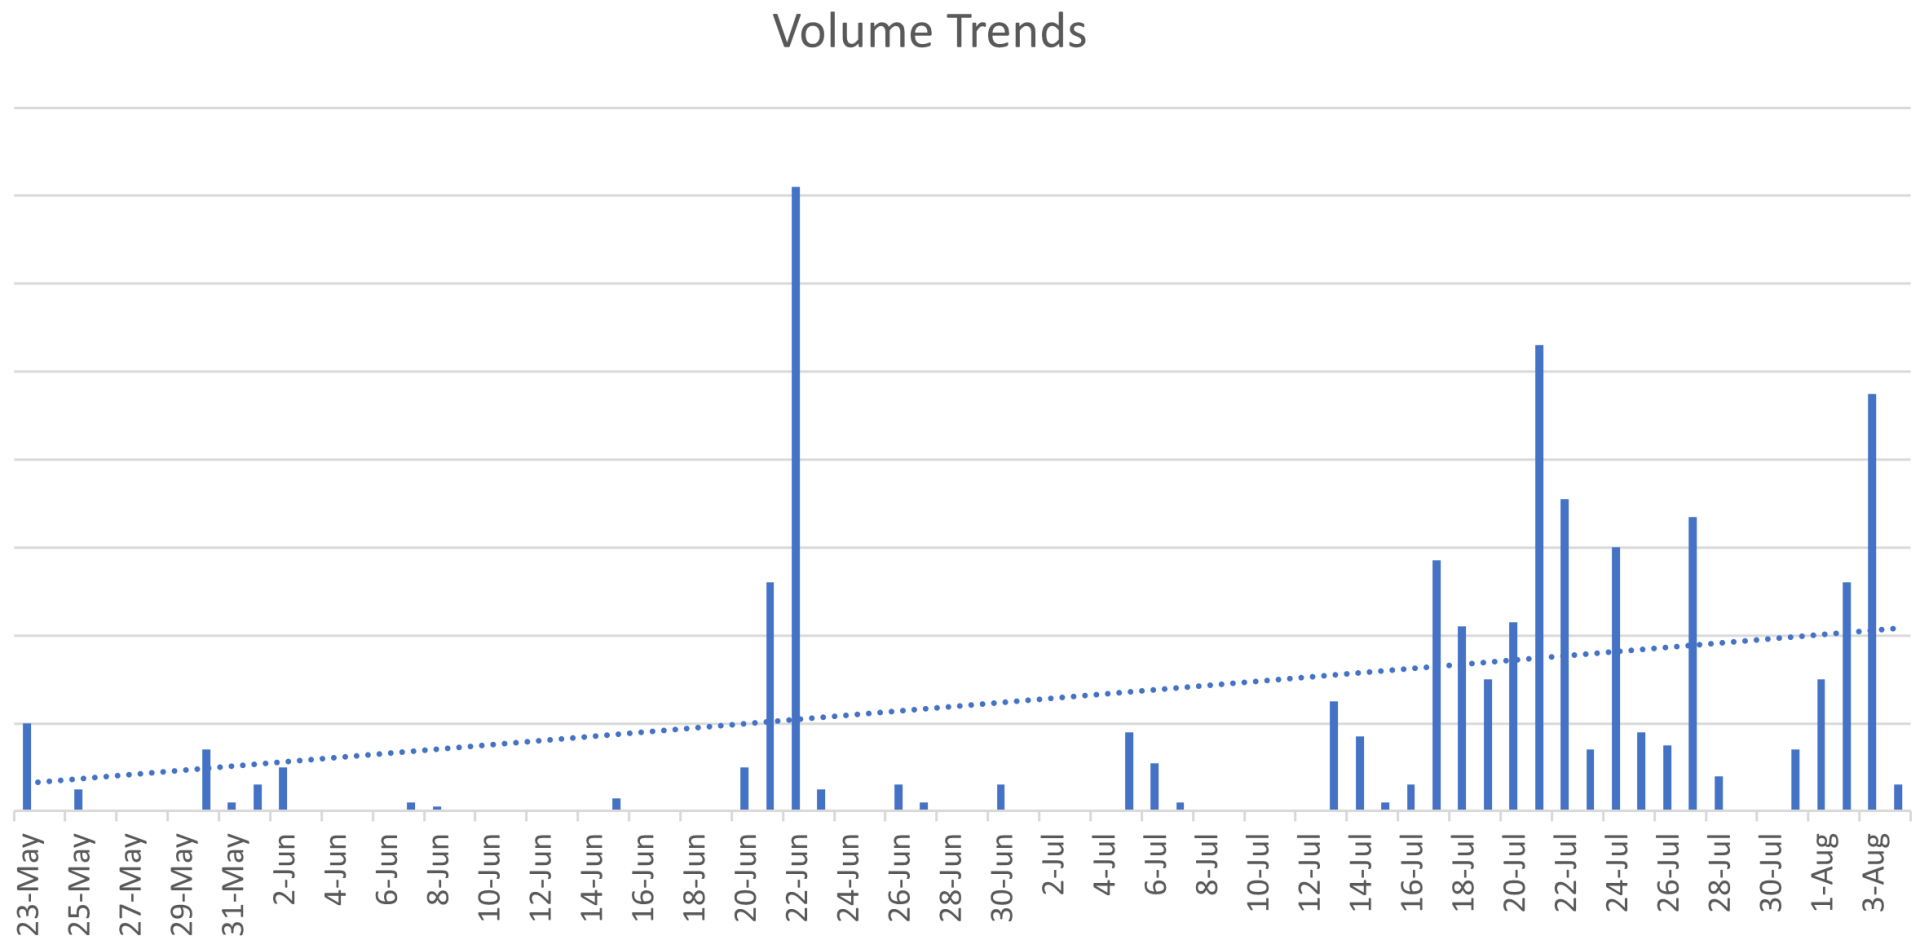 Figure 6: Volume Trends by Date 